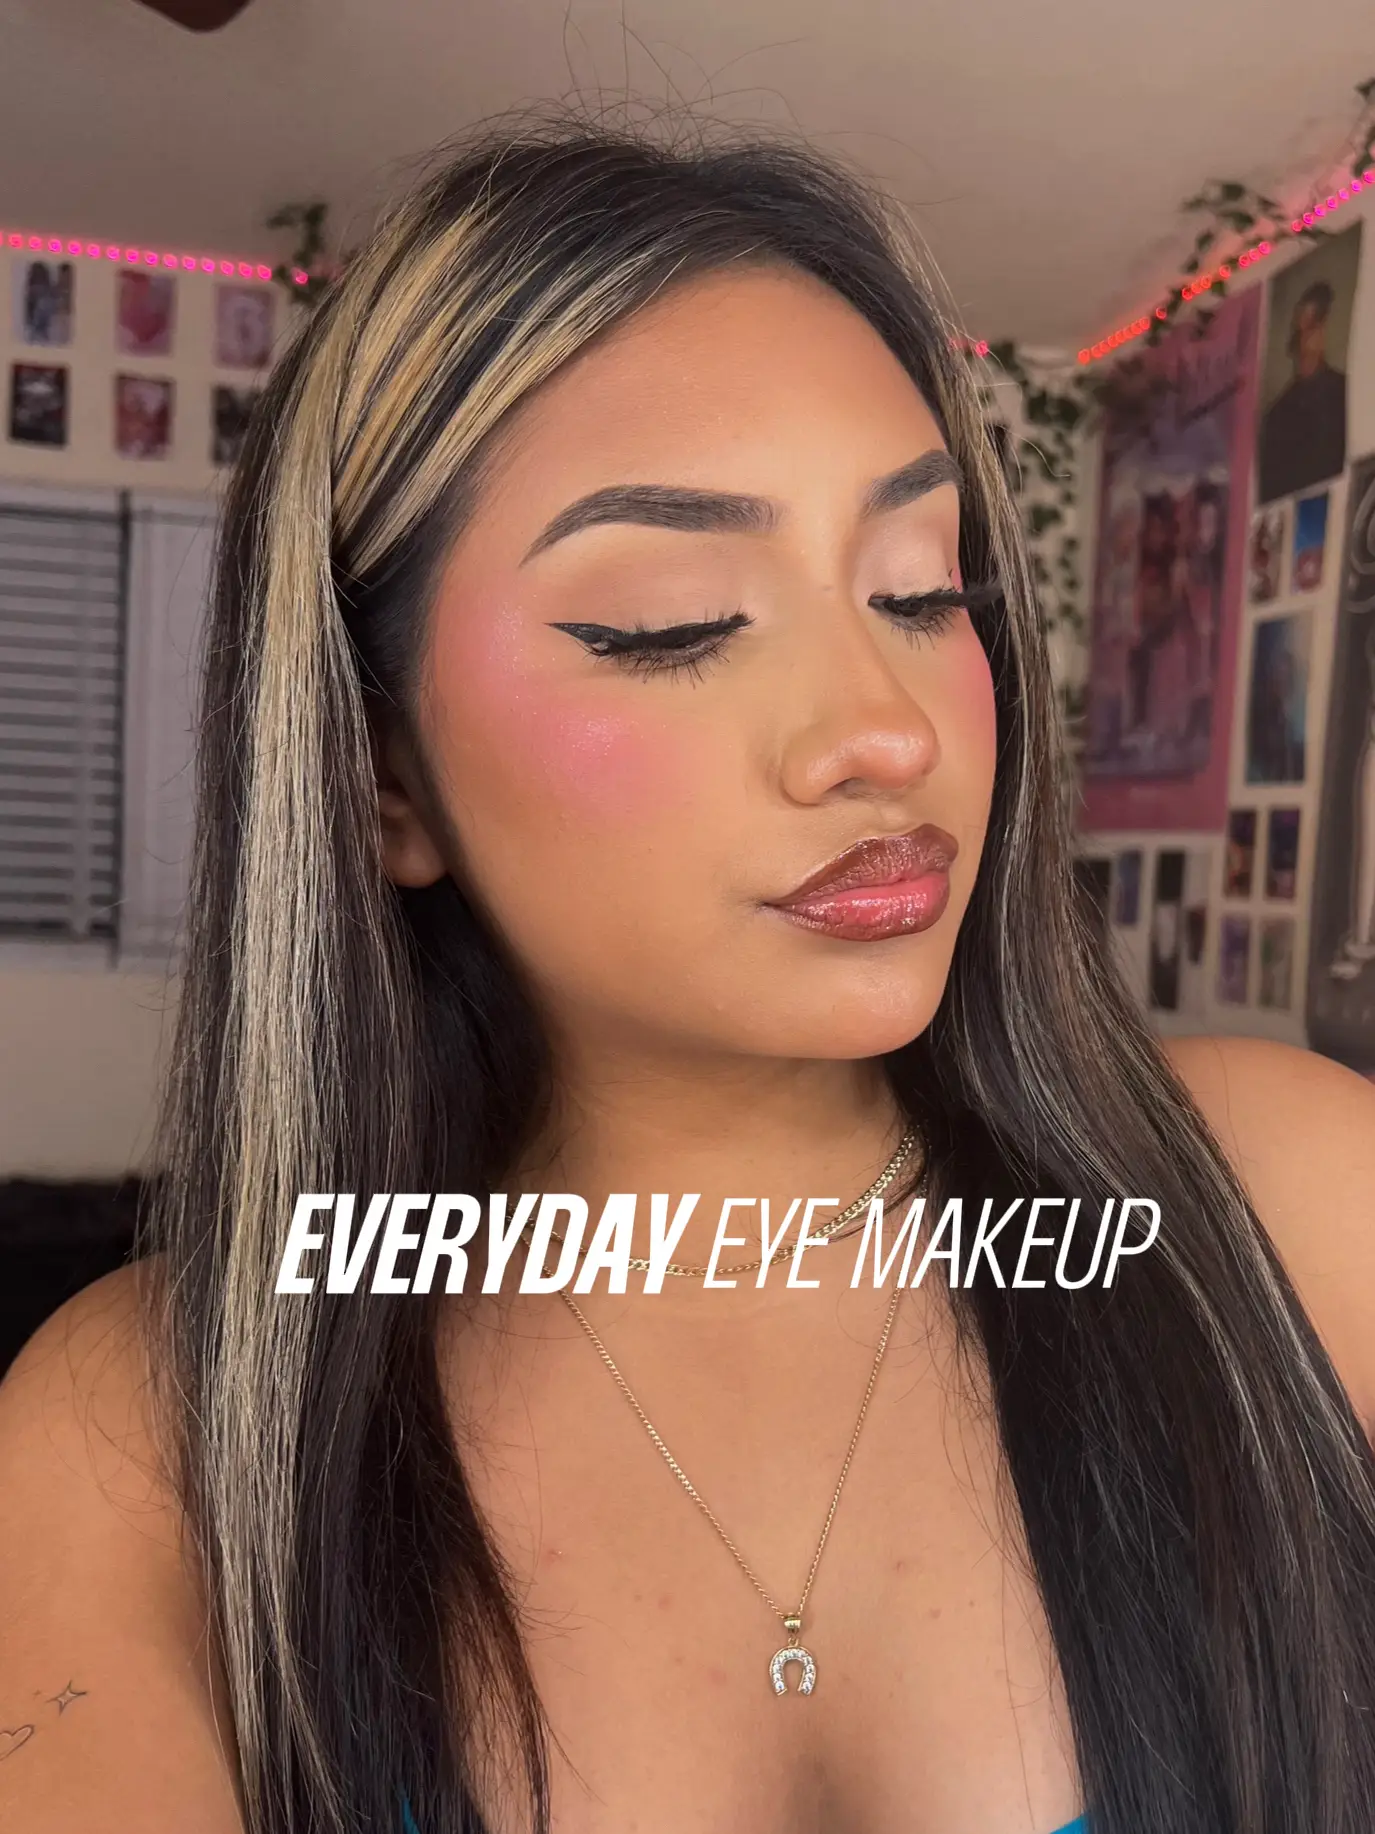 easy makeup routine from Eden._rose Lemon8 - Search